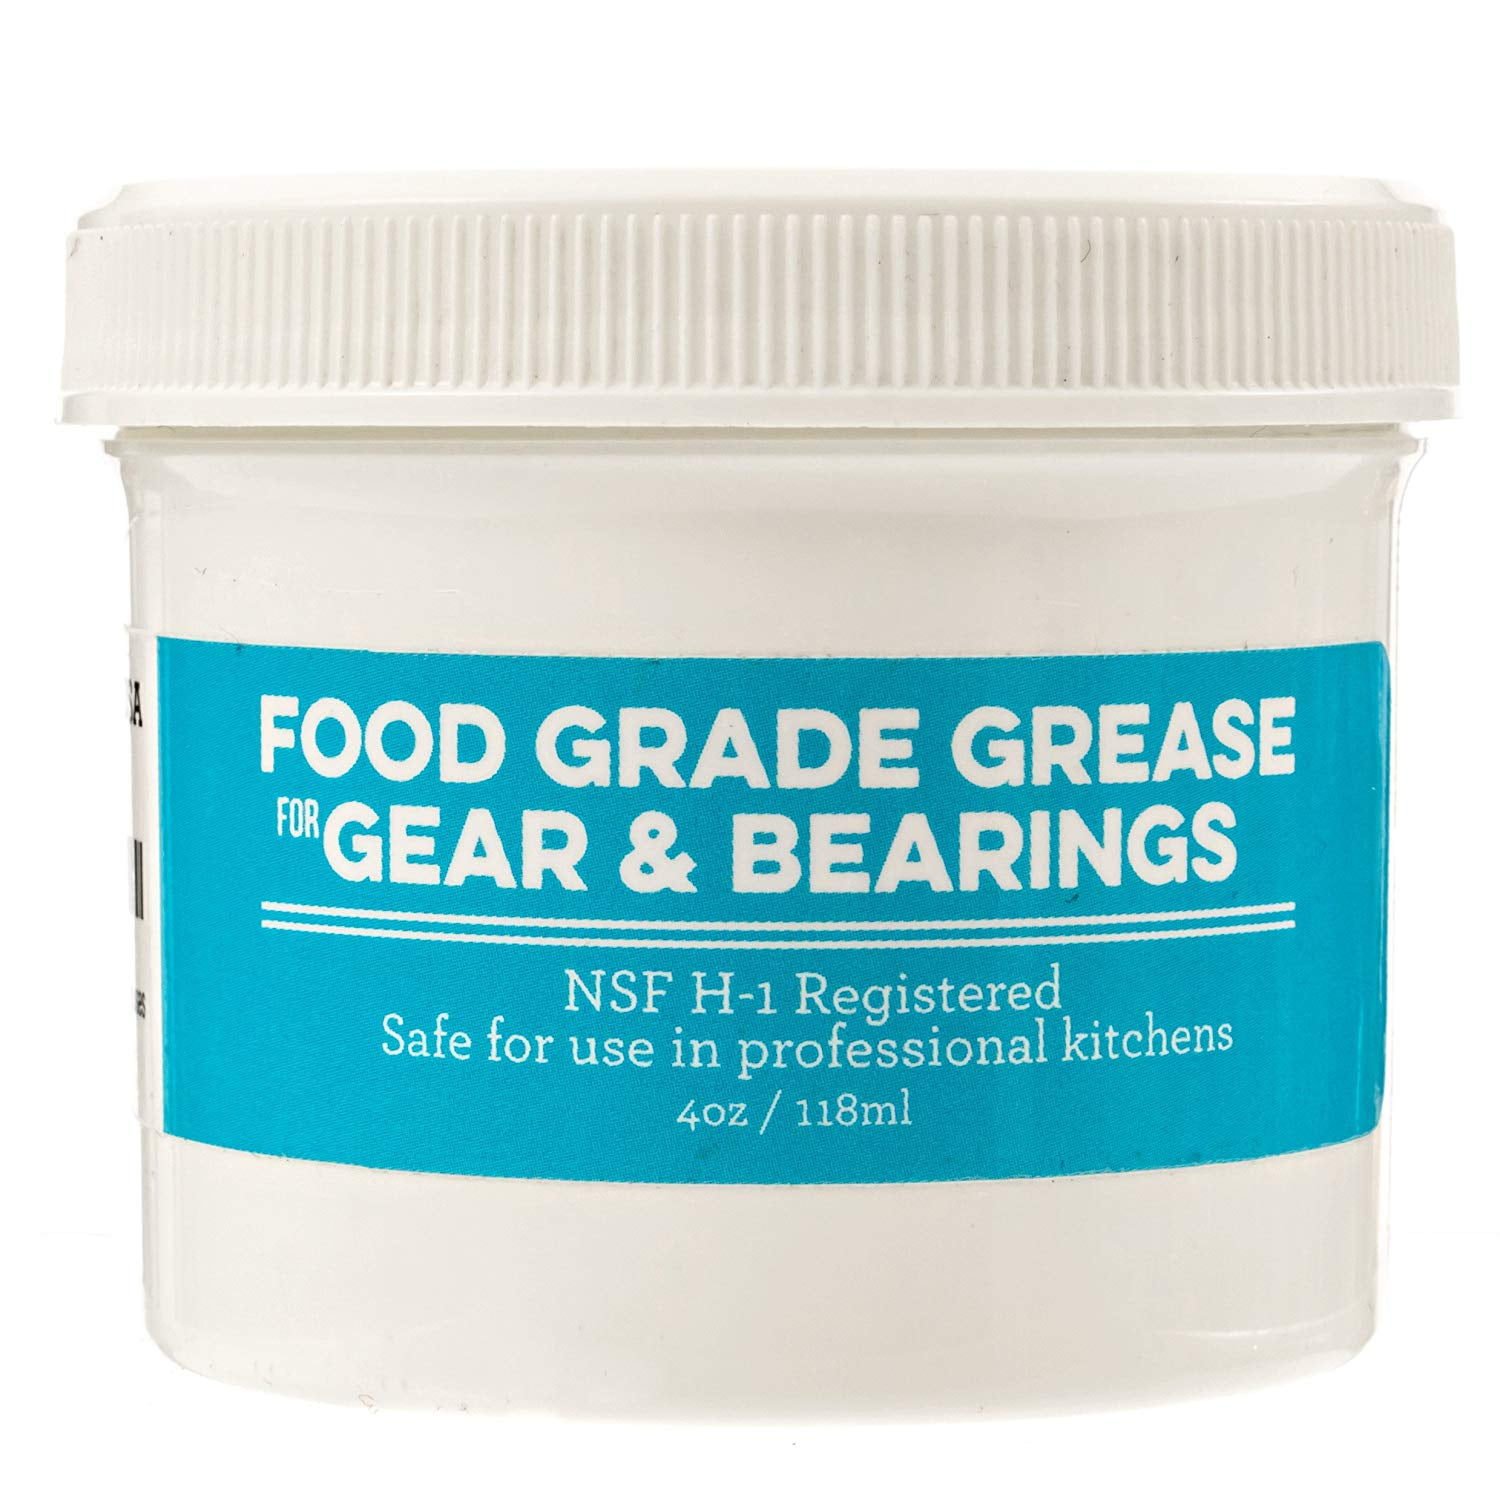 KitchenKipper 4oz Food Grade Grease for KitchenAid Stand Mixer, Universally Compatible with Most Stand Mixers - Equipped with Gasket & Spatula - Pack